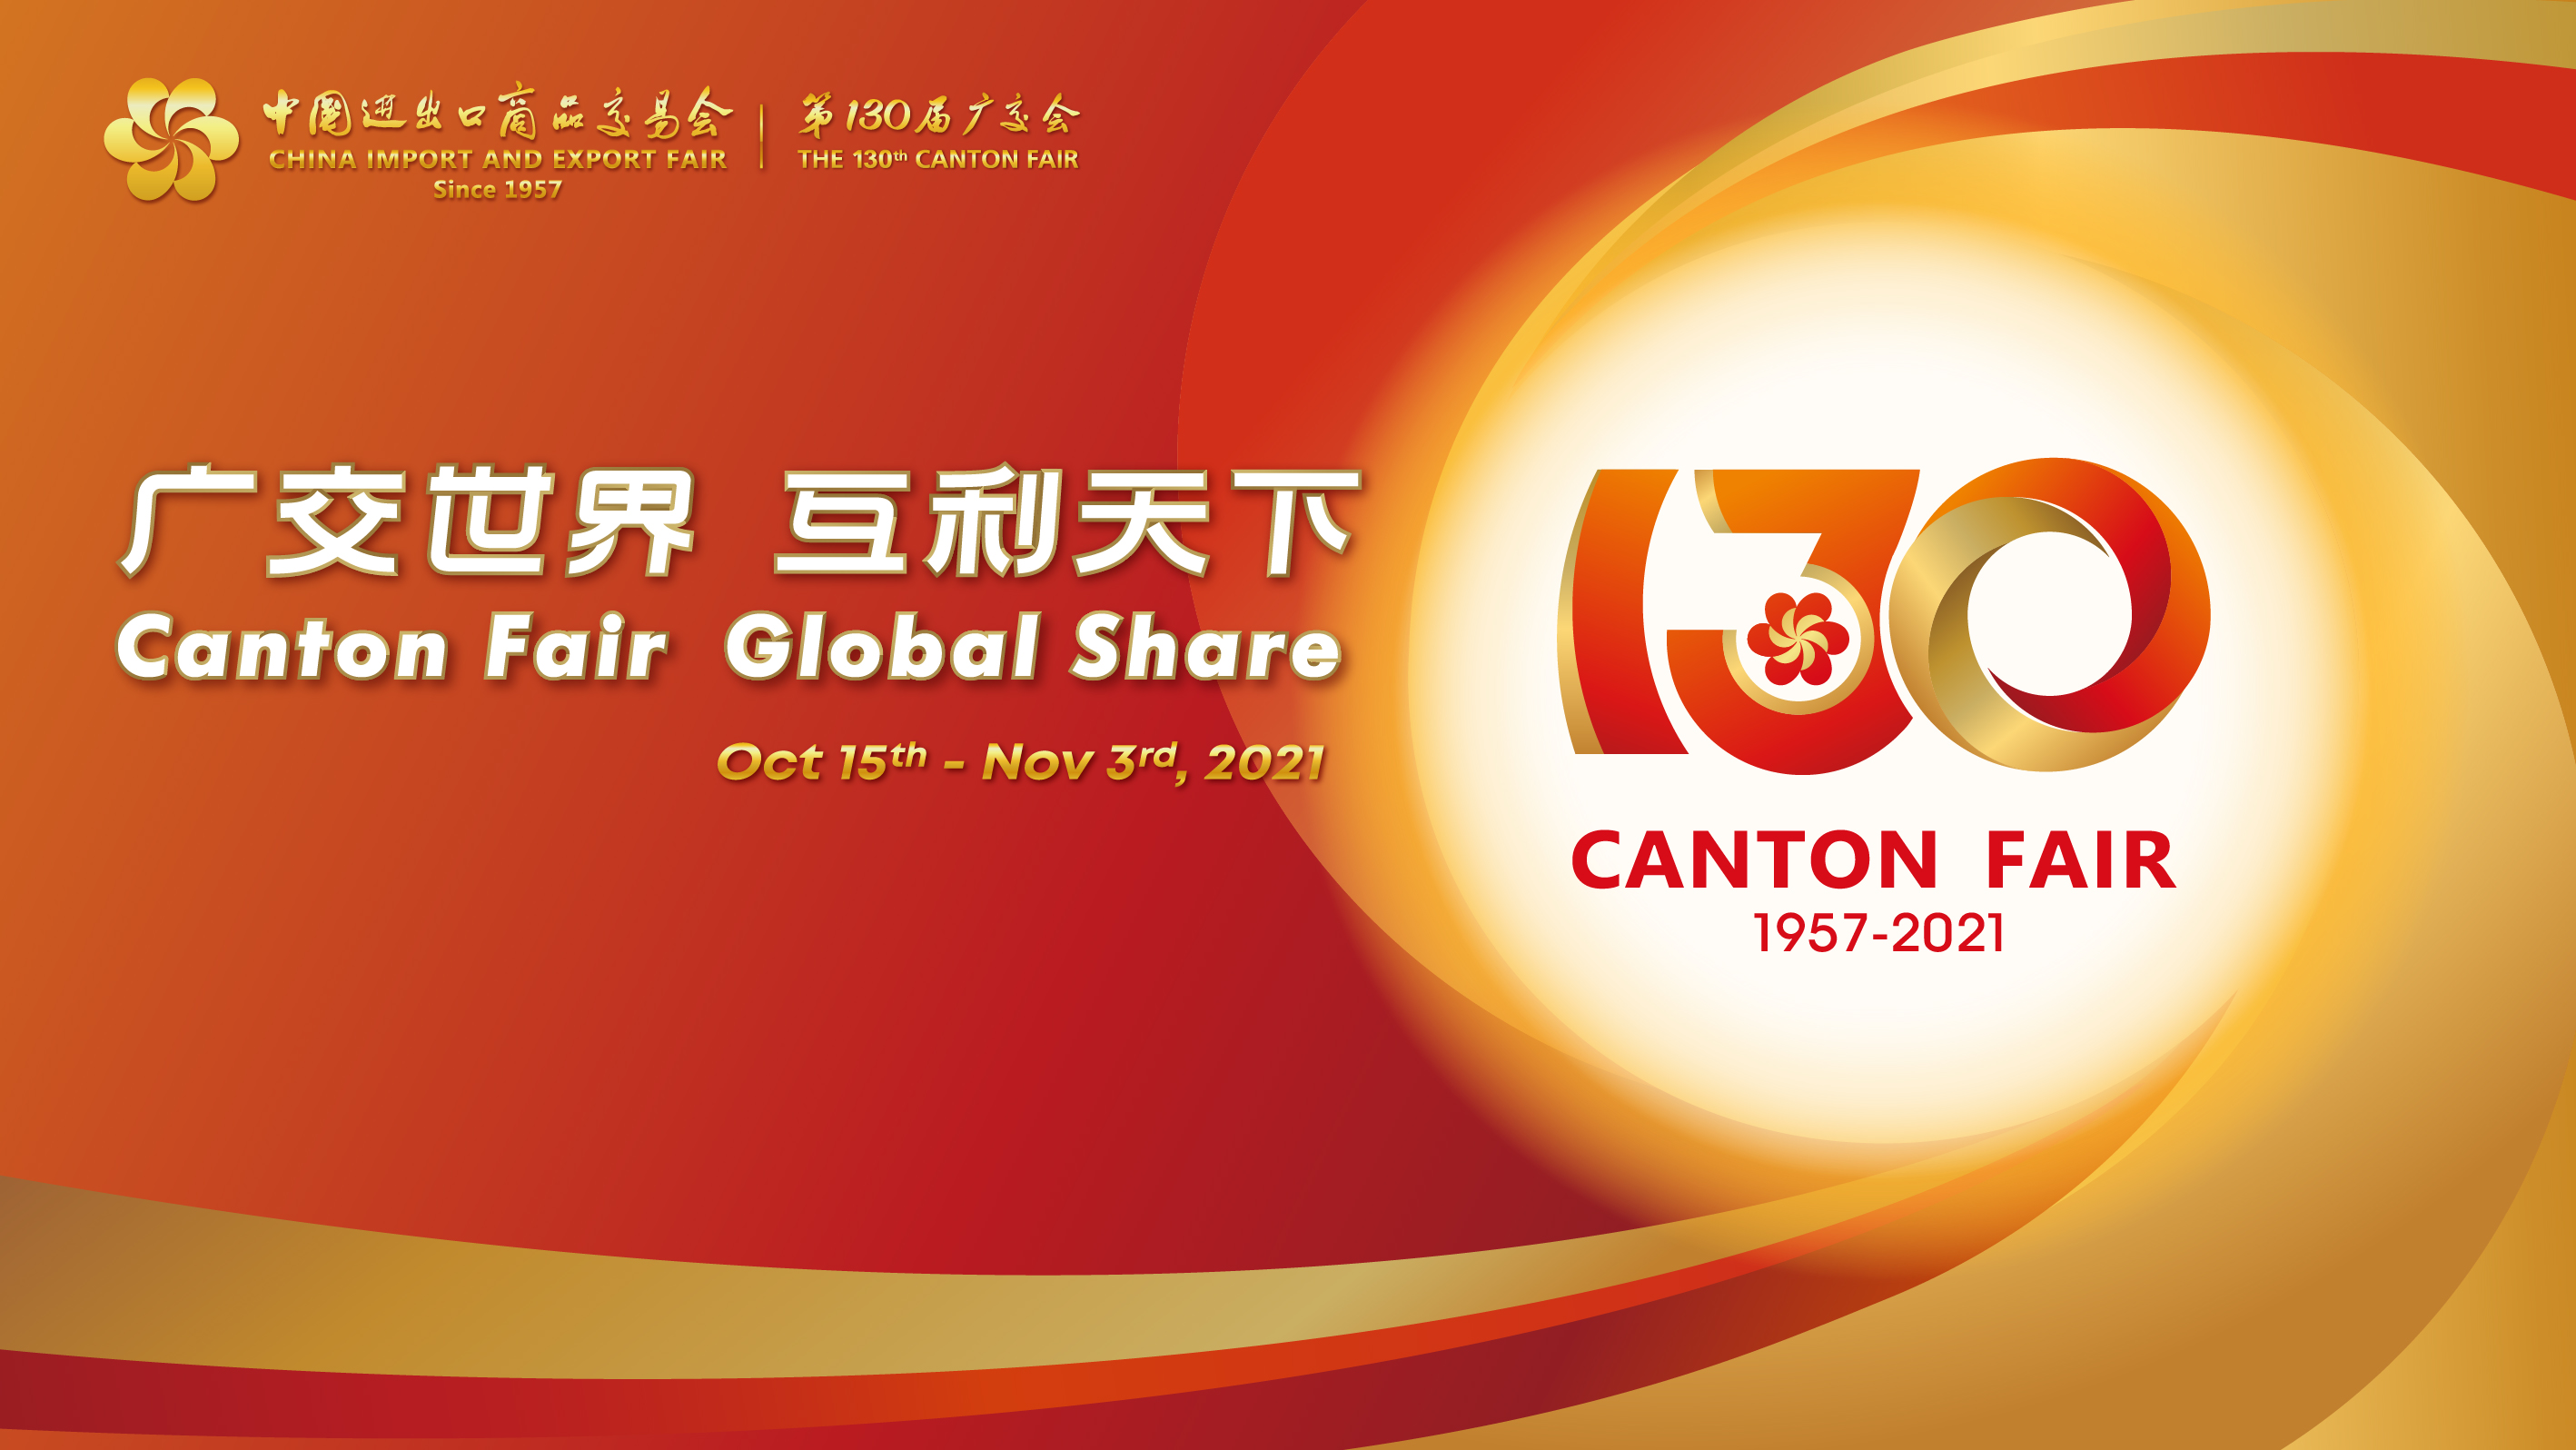 Welcome to visit our webcast at the 130th Canton Fair online